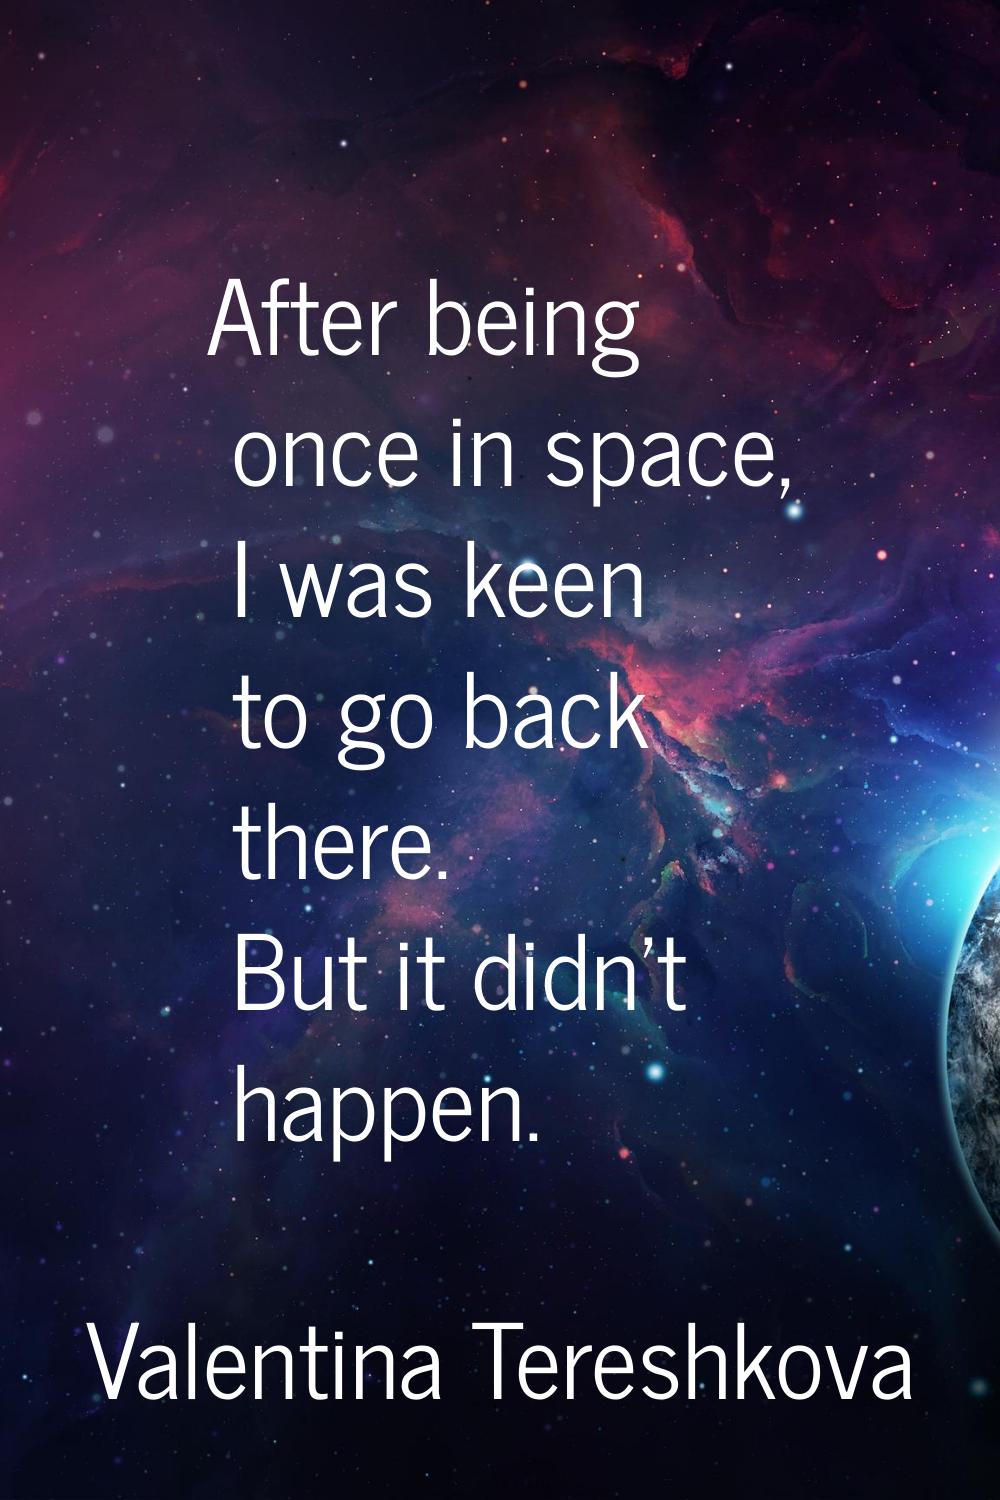 After being once in space, I was keen to go back there. But it didn't happen.